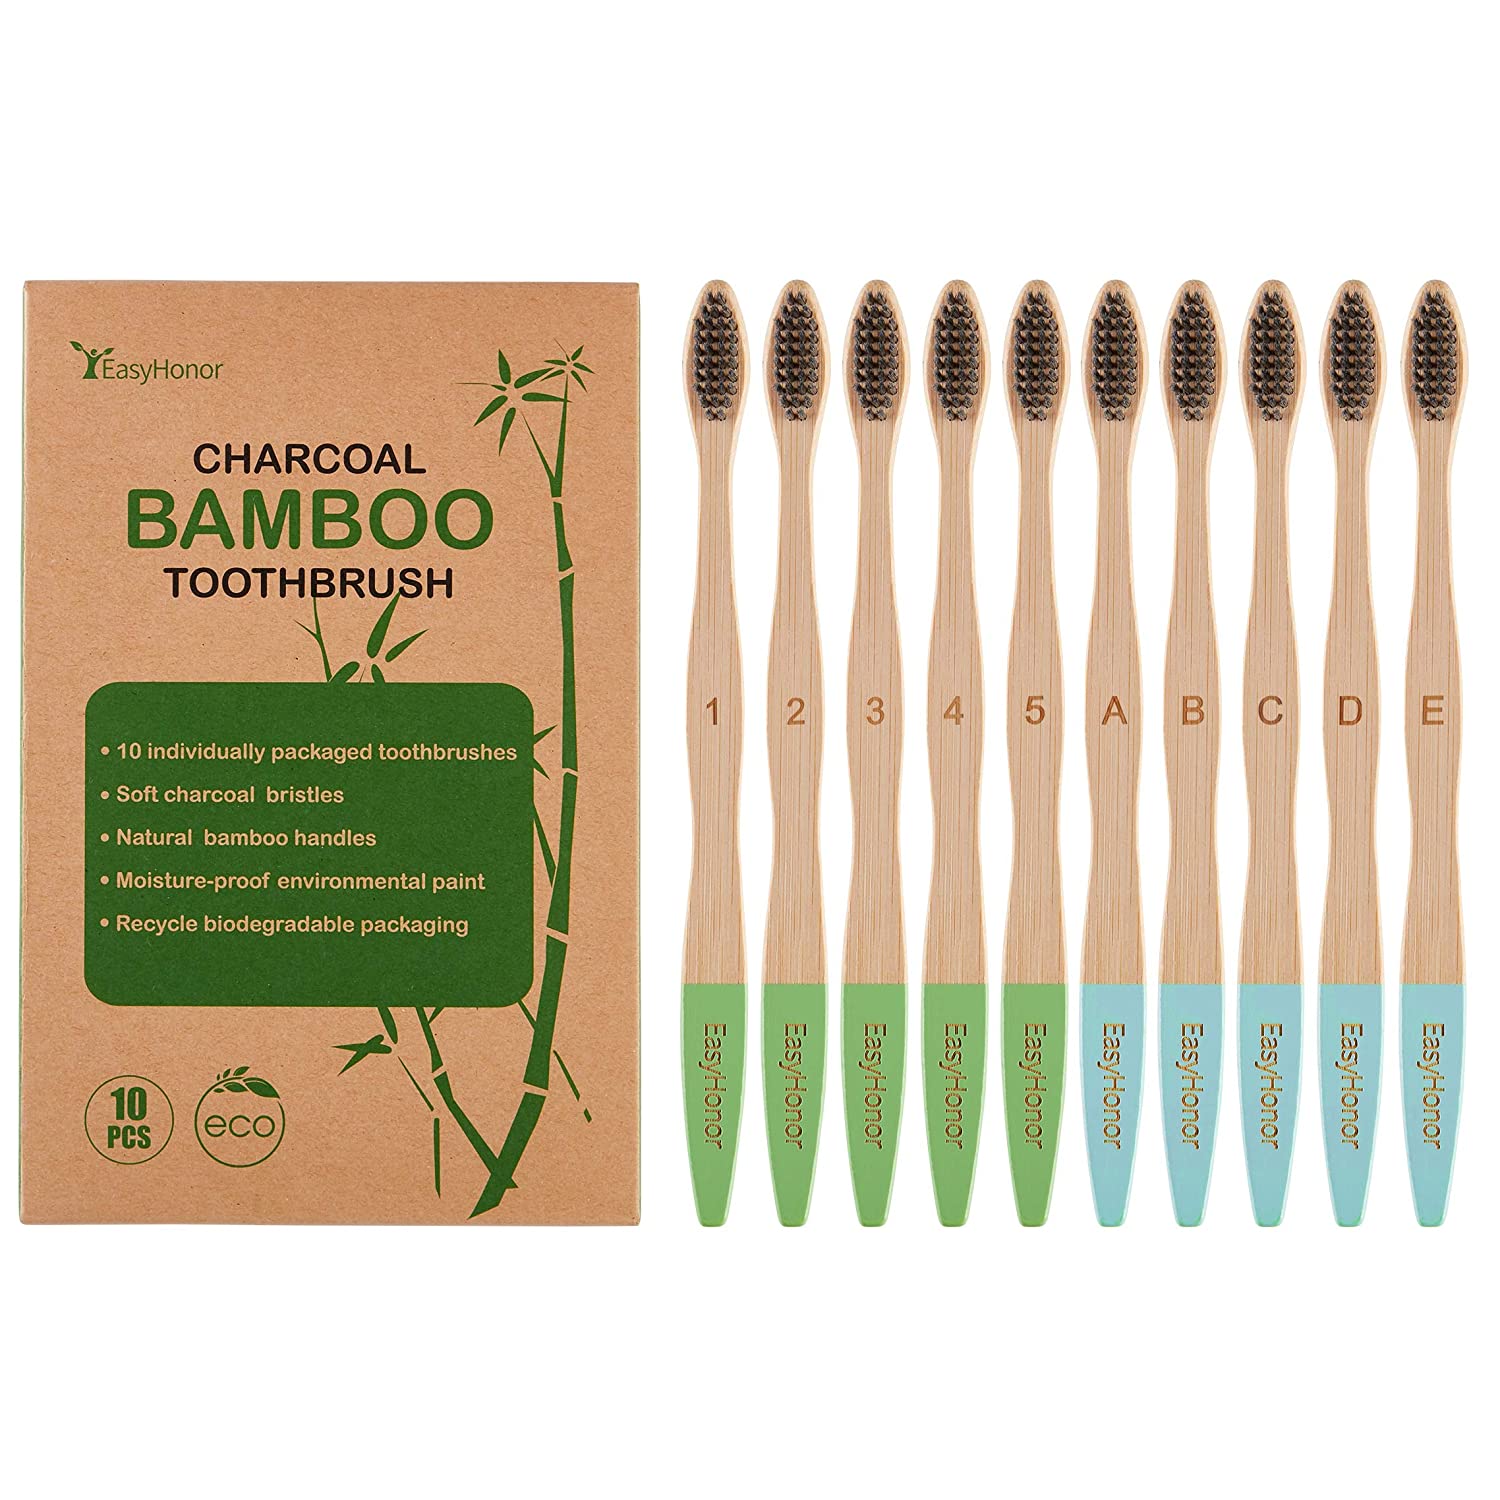 EasyHonor 10 Pack Bamboo Charcoal Toothbrushes for Adults and Teenagers, Biodegradable Organic bamboo eco friendly toothbrushes, with Ergonomic Handles and Soft Charcoal Bristles BPA Free